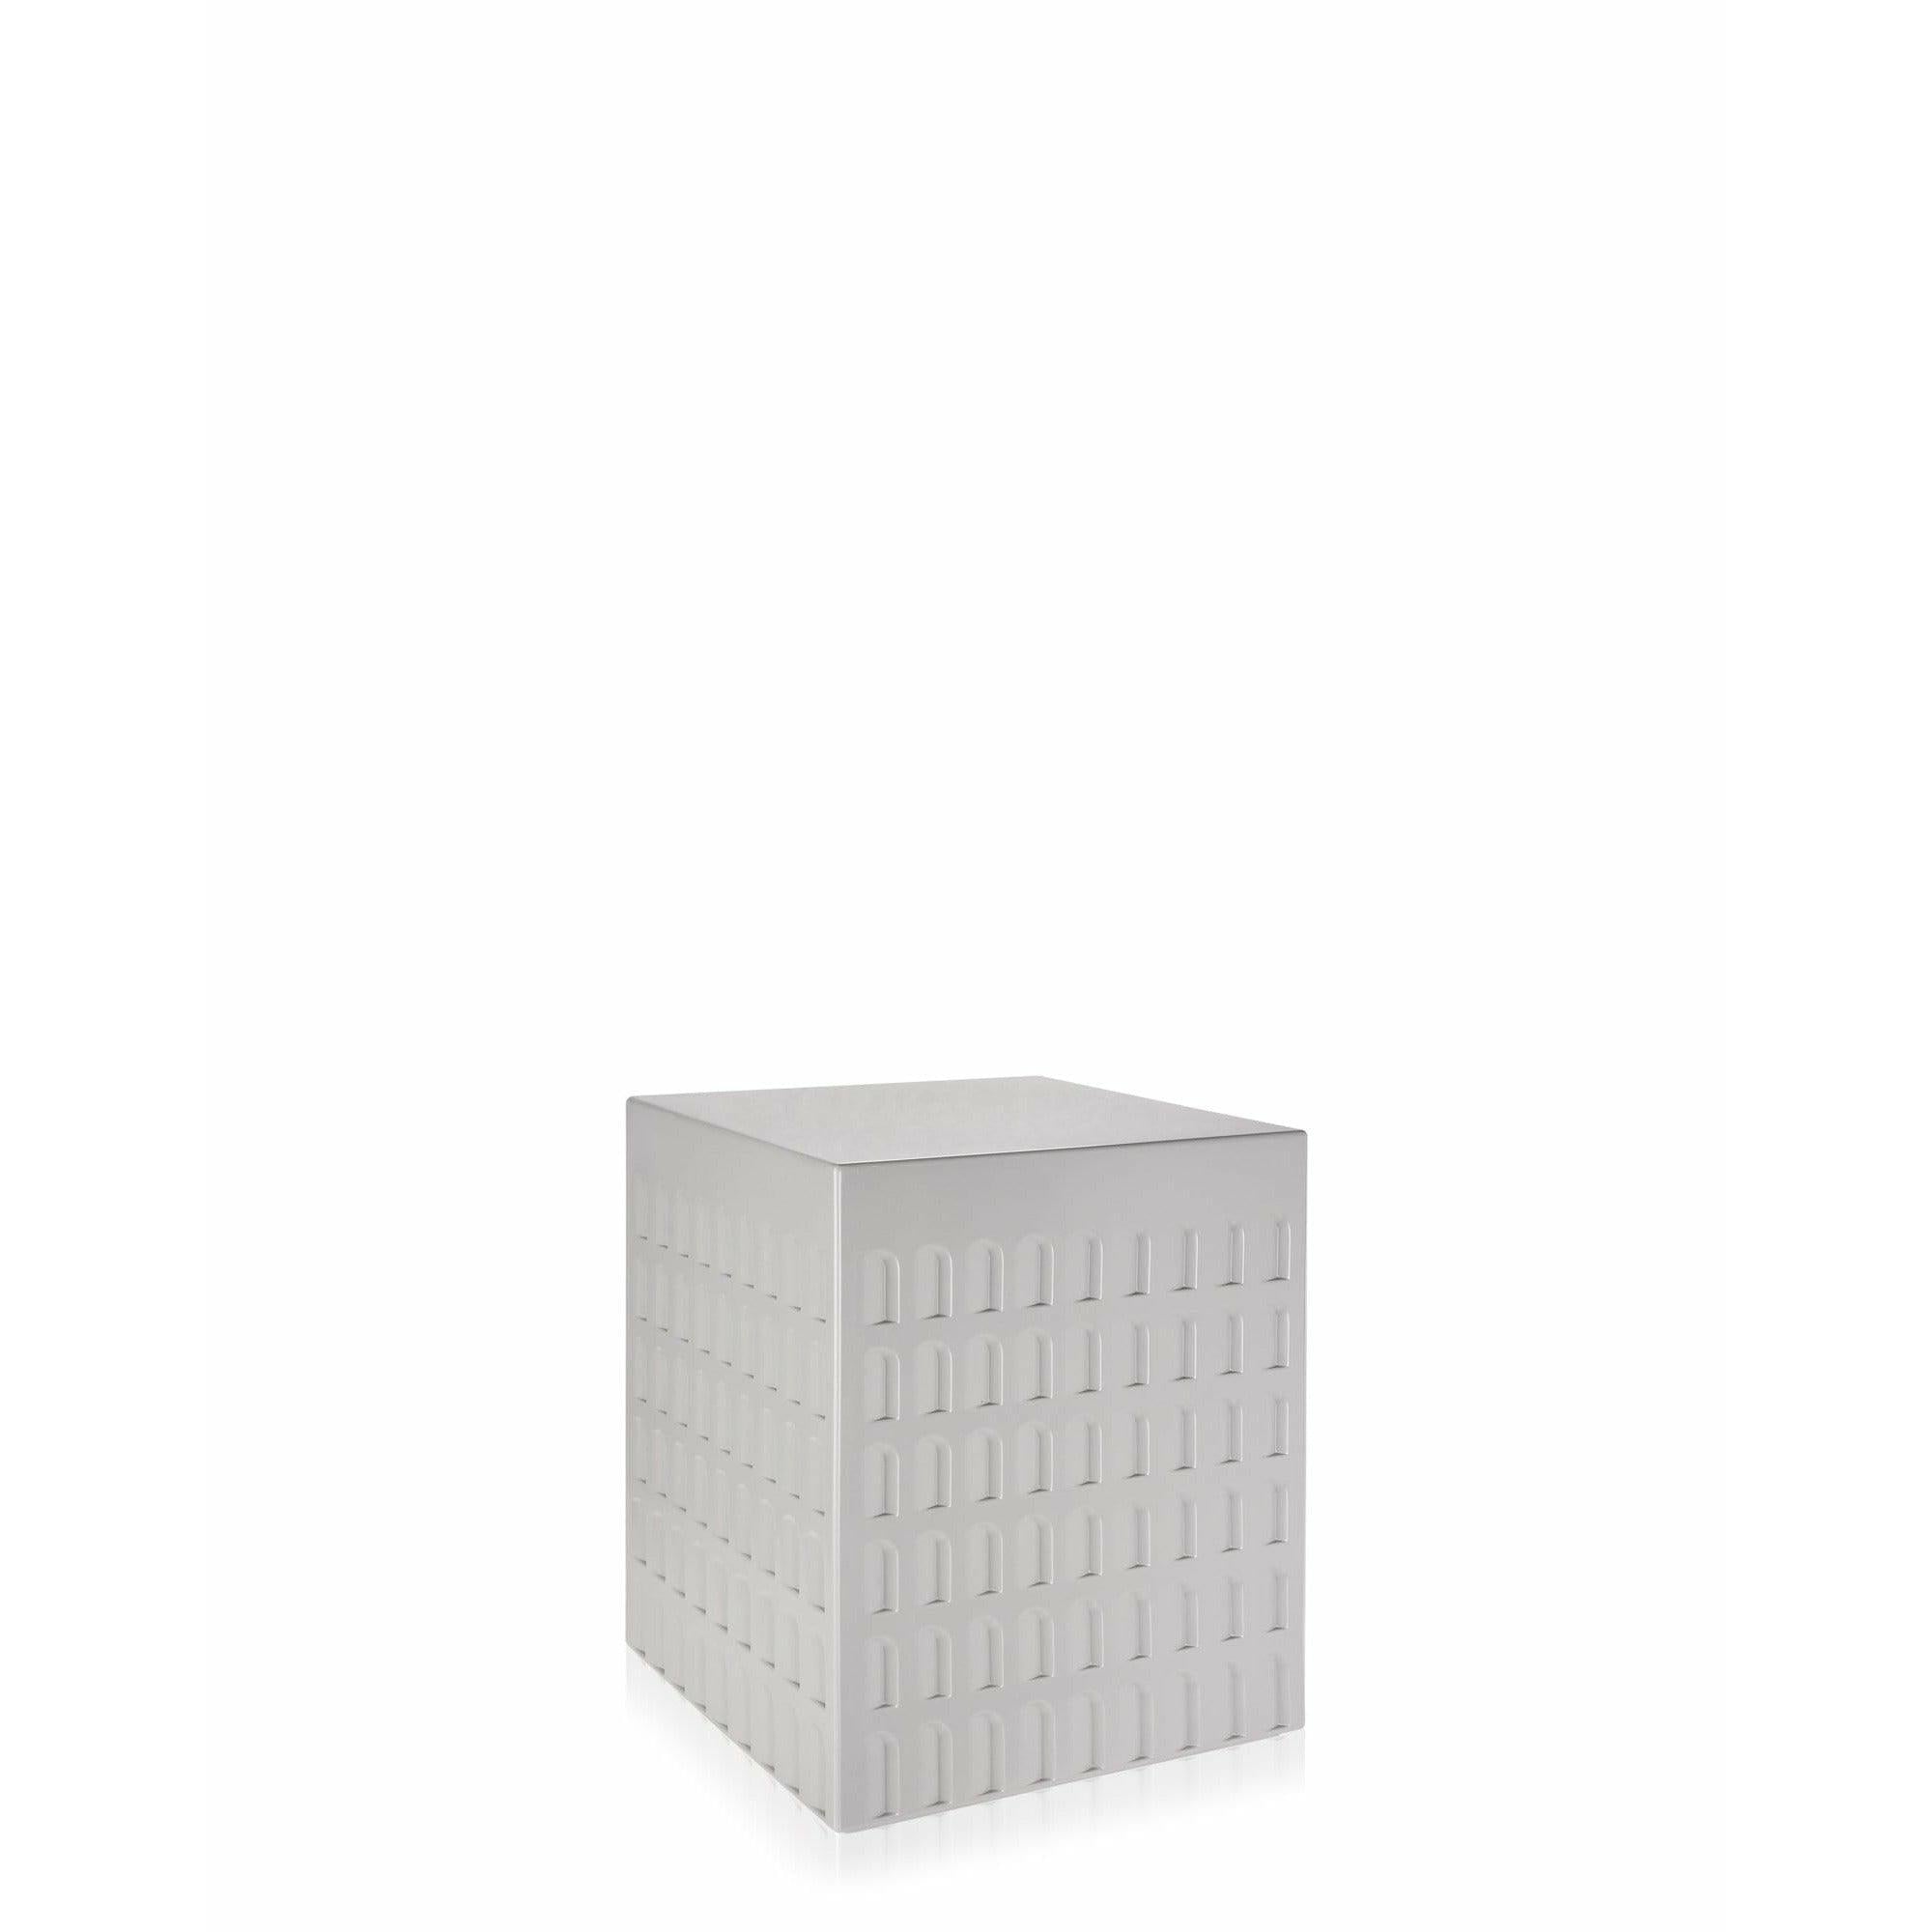 Eur Cube Stool - Curated - Furniture - Kartell